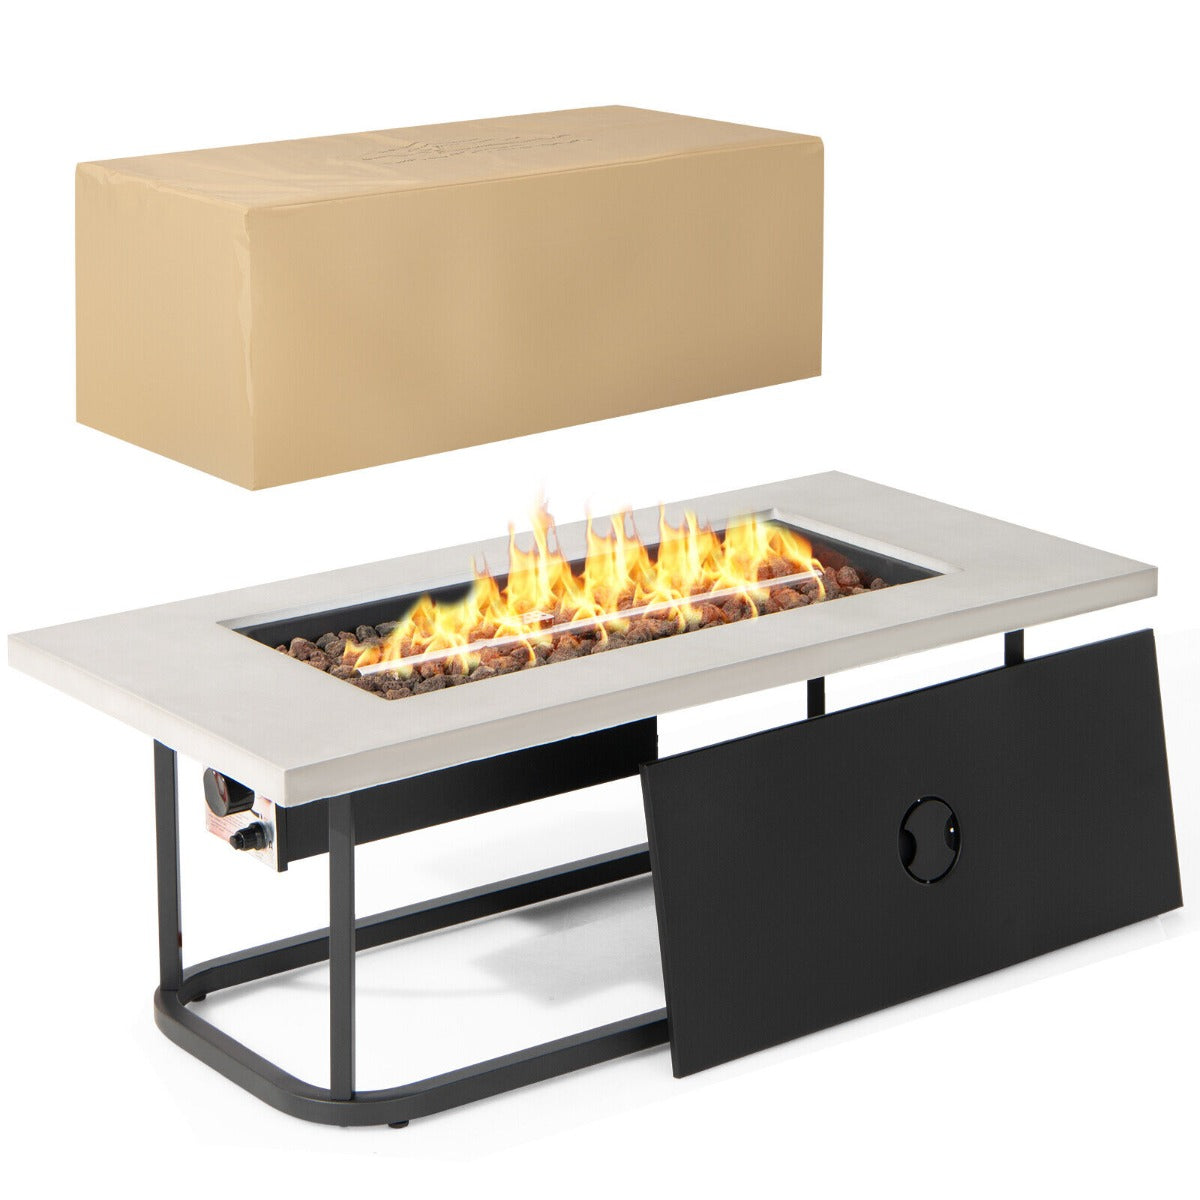 16 KW Propane Fire Pit Table with Waterproof PVC Cover and Lid Grey